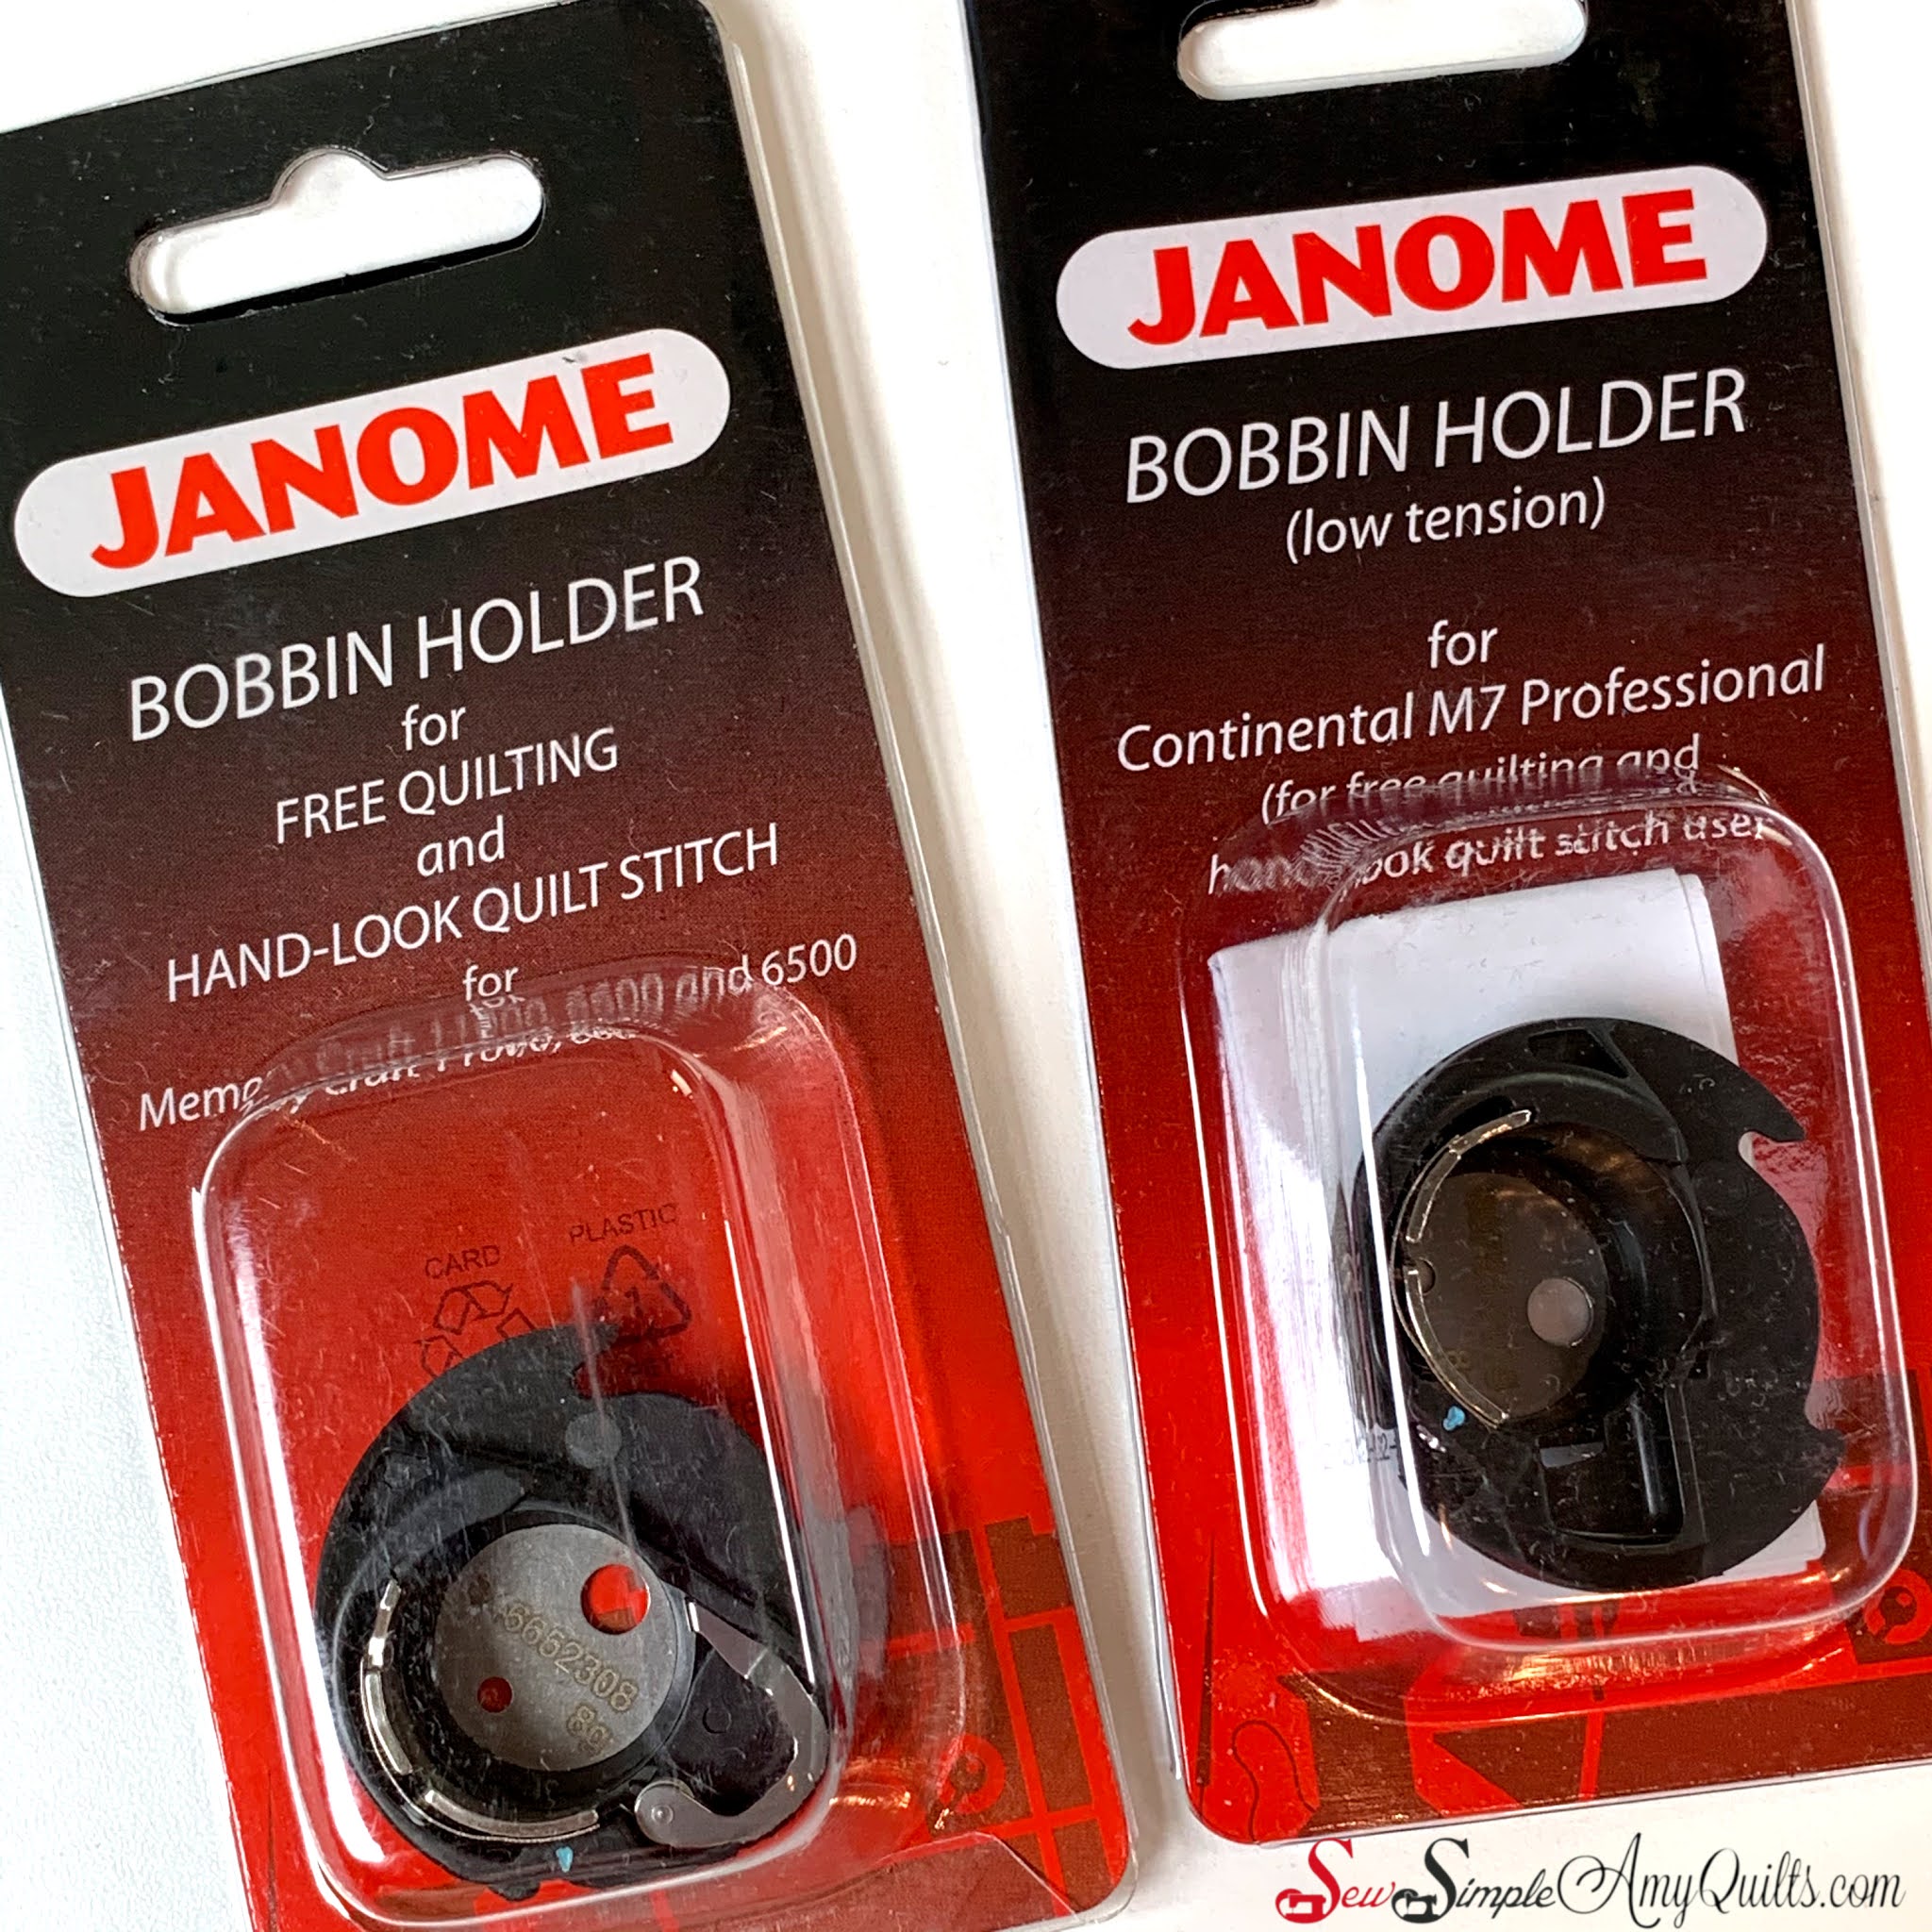 Janome Bobbin Holder for free motion quilting BLUE DOT - 200445007